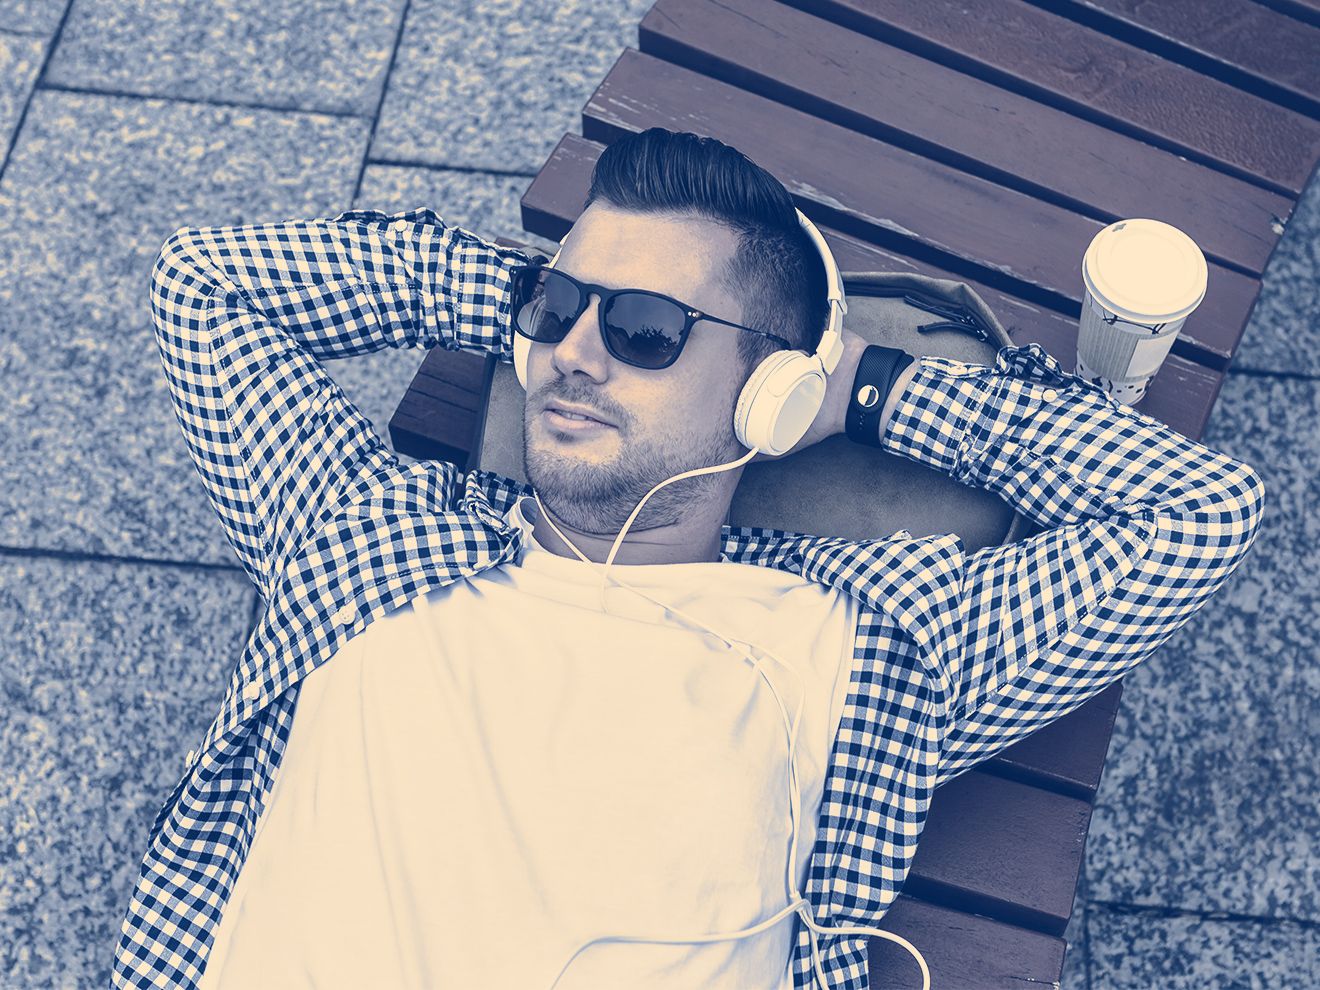 11 E-Commerce Podcasts To Add To Your Playlist In 2022